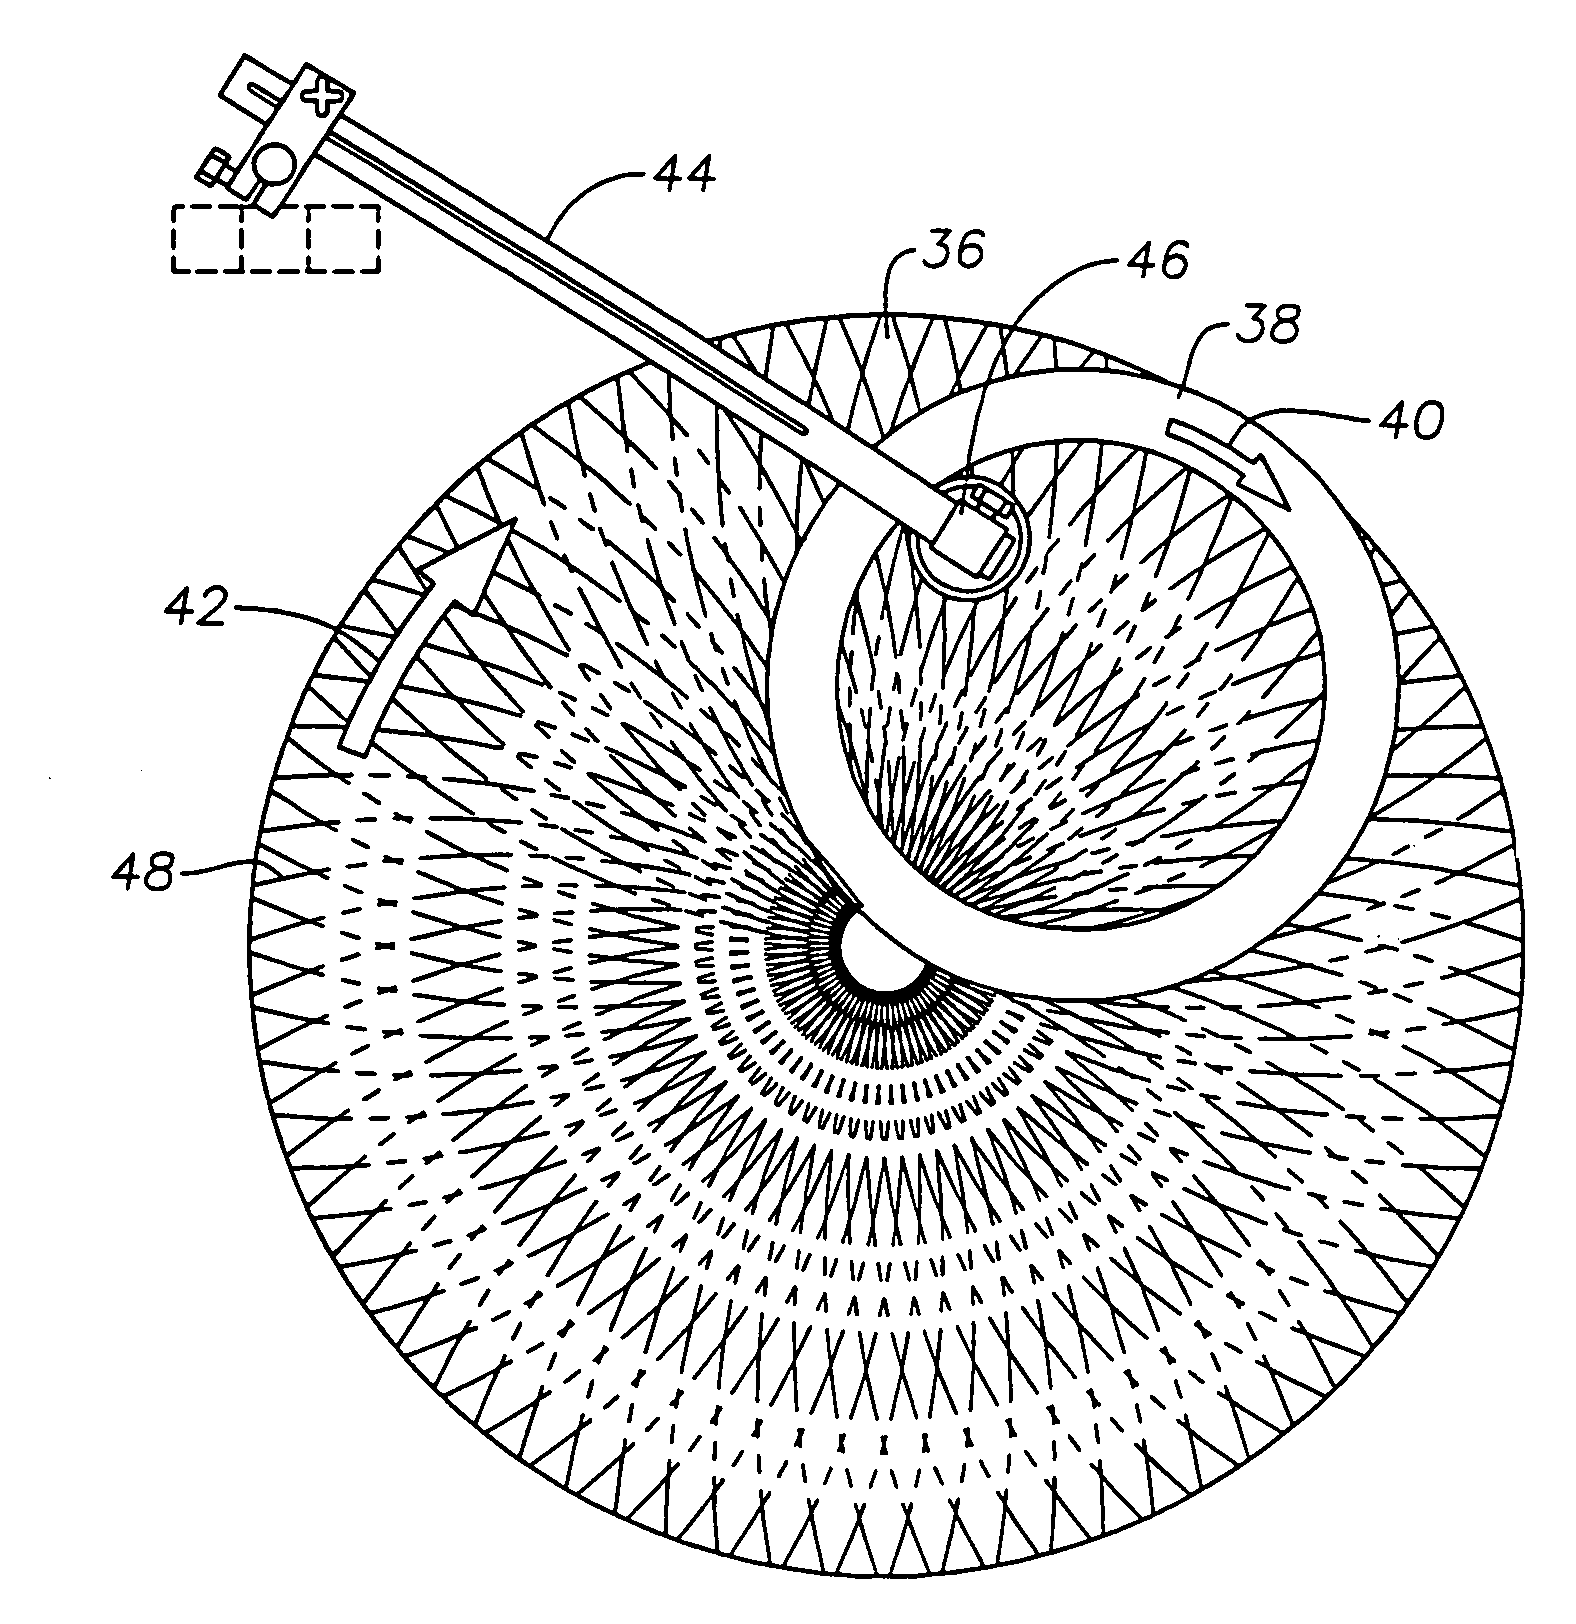 Apparatus and method for precise lapping of recessed and protruding elements in a workpiece